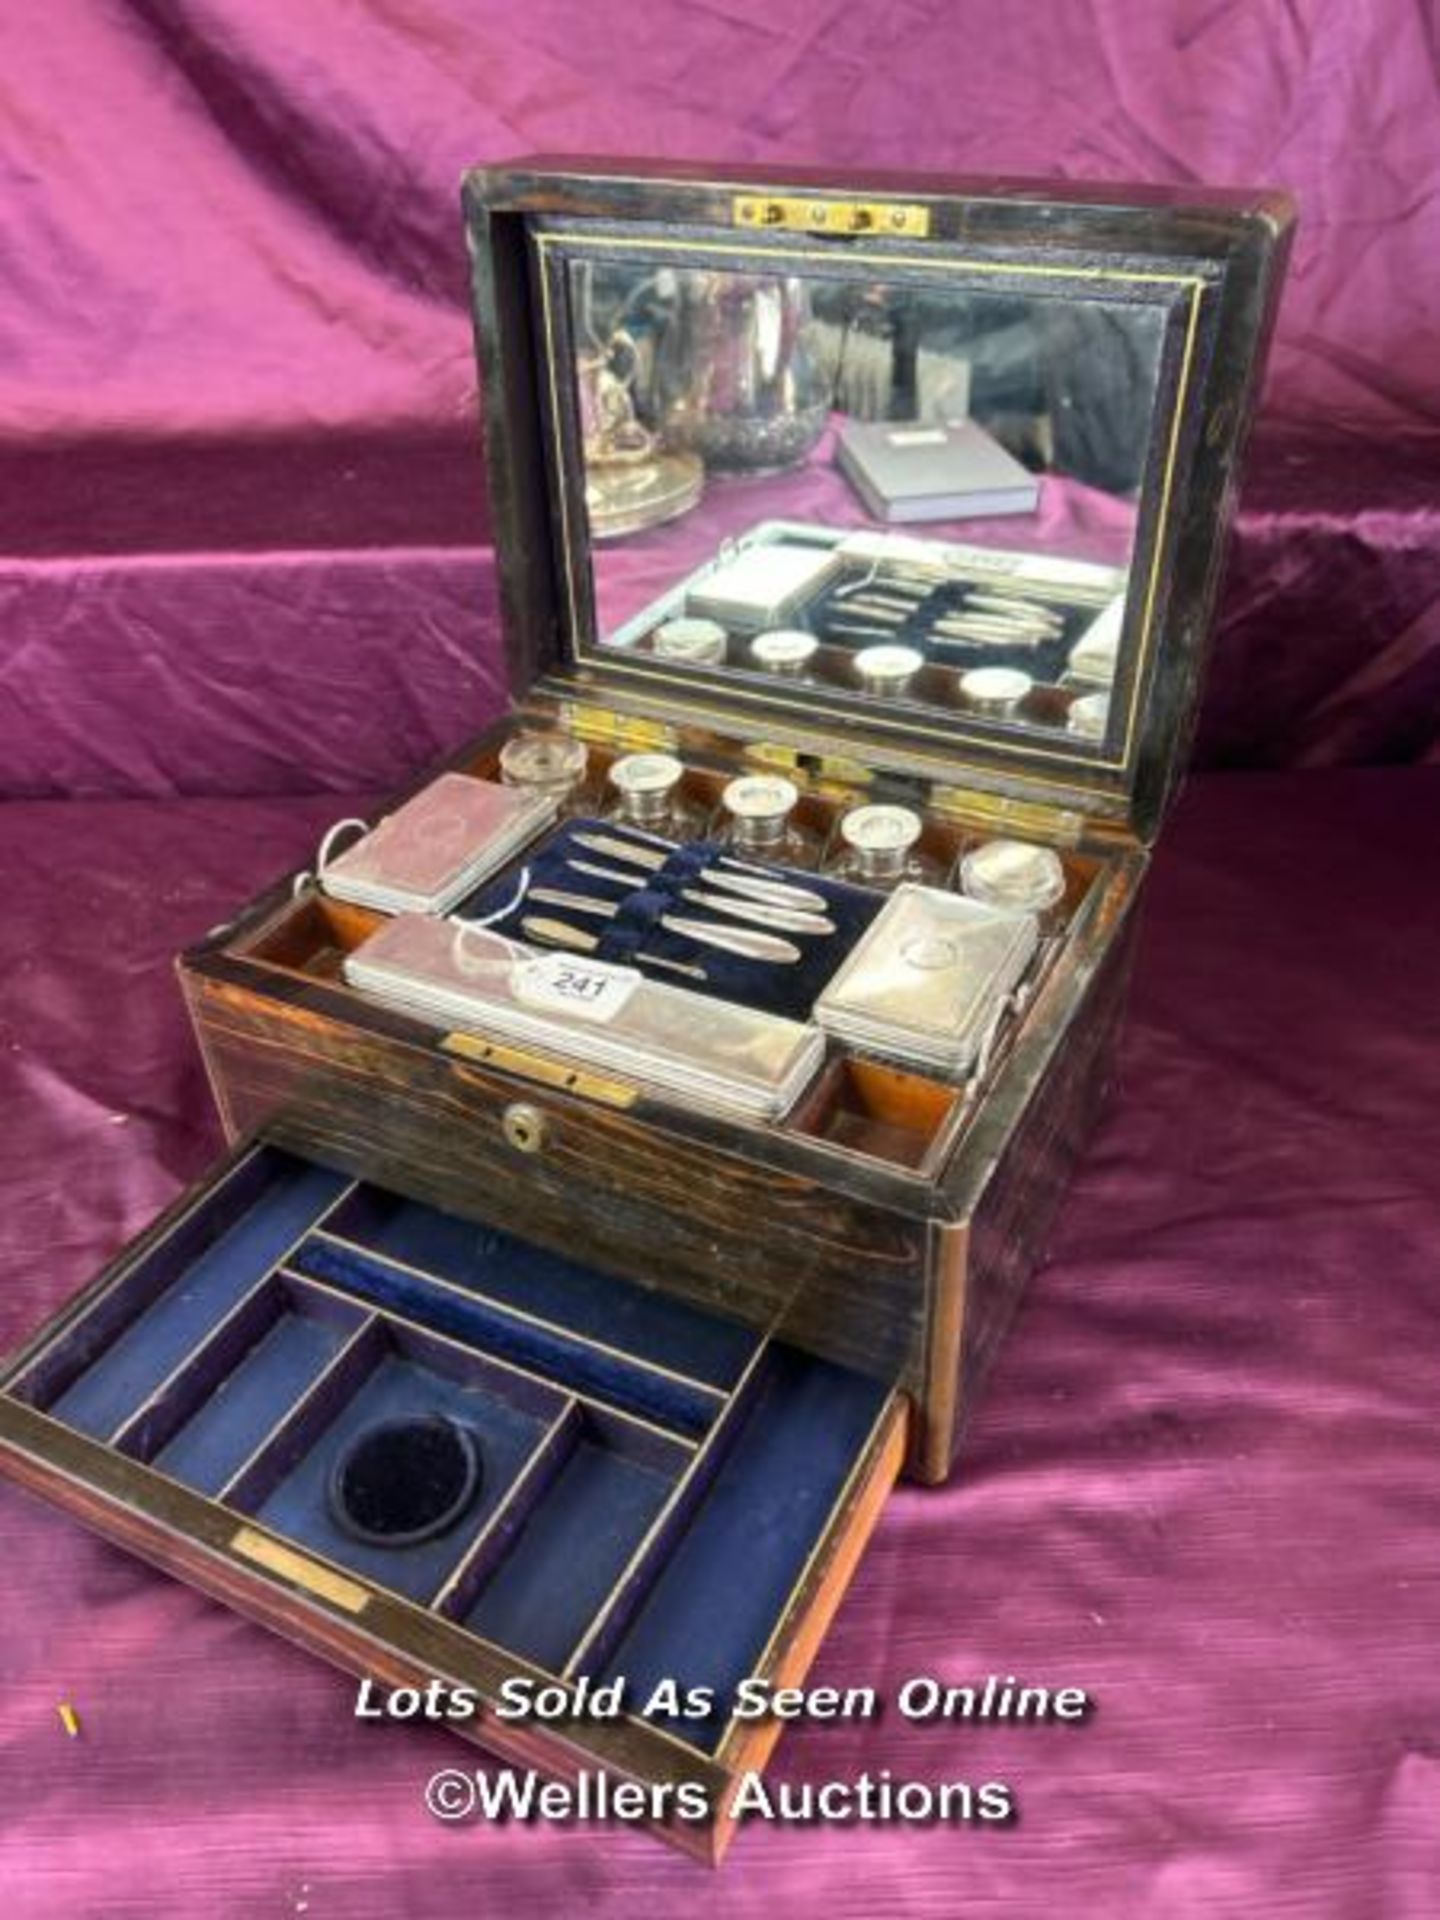 EARLY 19TH CENTURY GENTLEMAN'S VANITY BOX CONTAINING STERLING SILVER AND GLASS CONTAINERS WITH